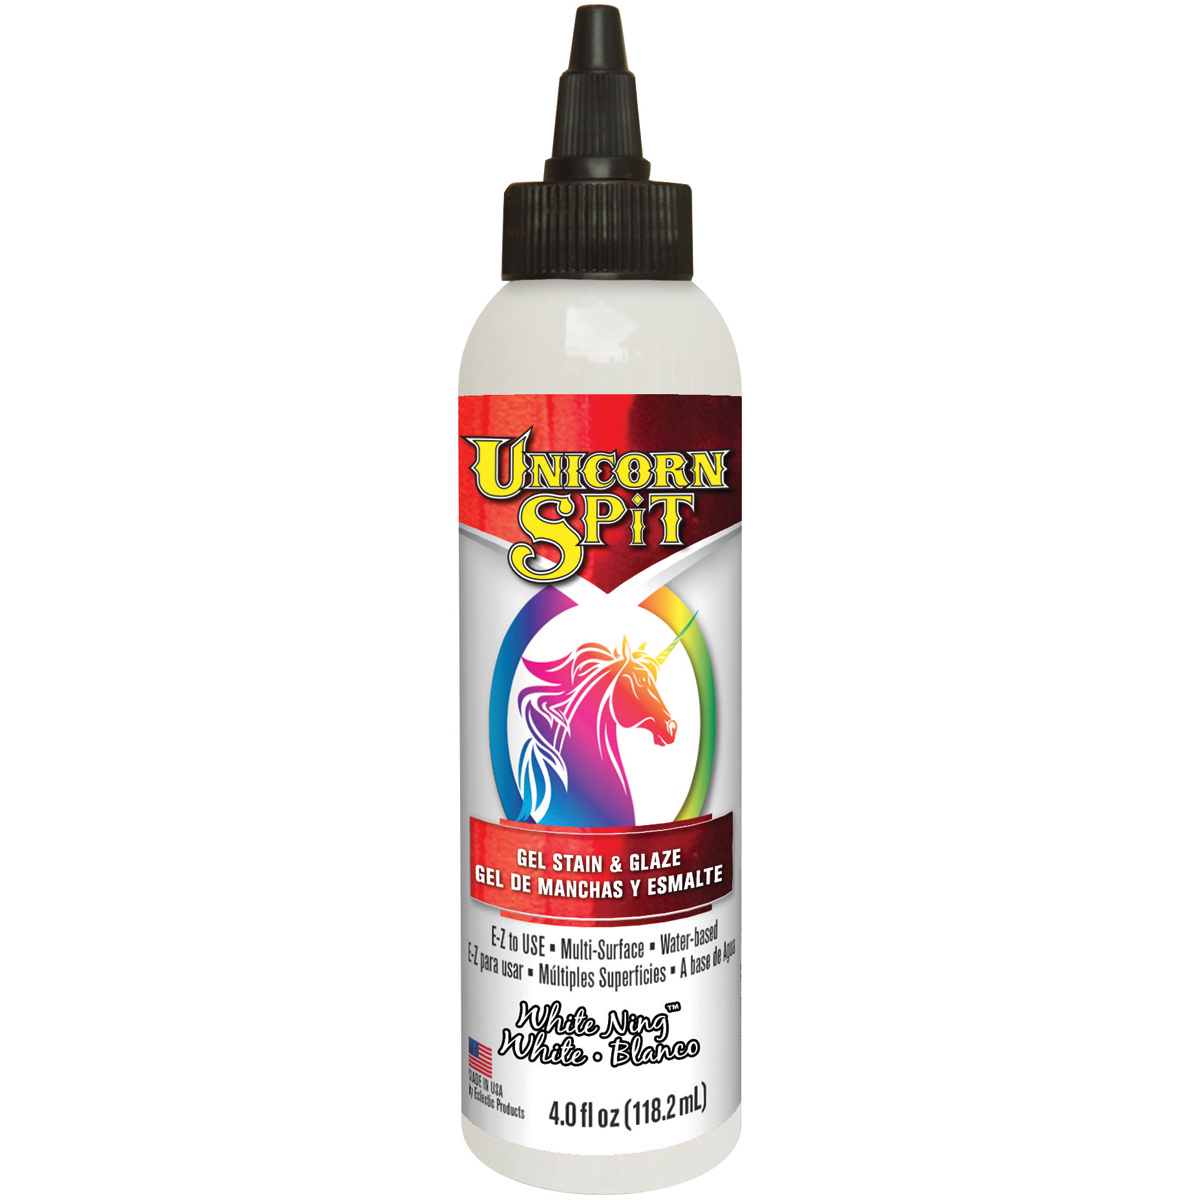 Eclectic 5770-005 Unicorn Spit Wood Stain And Glaze - White Ning